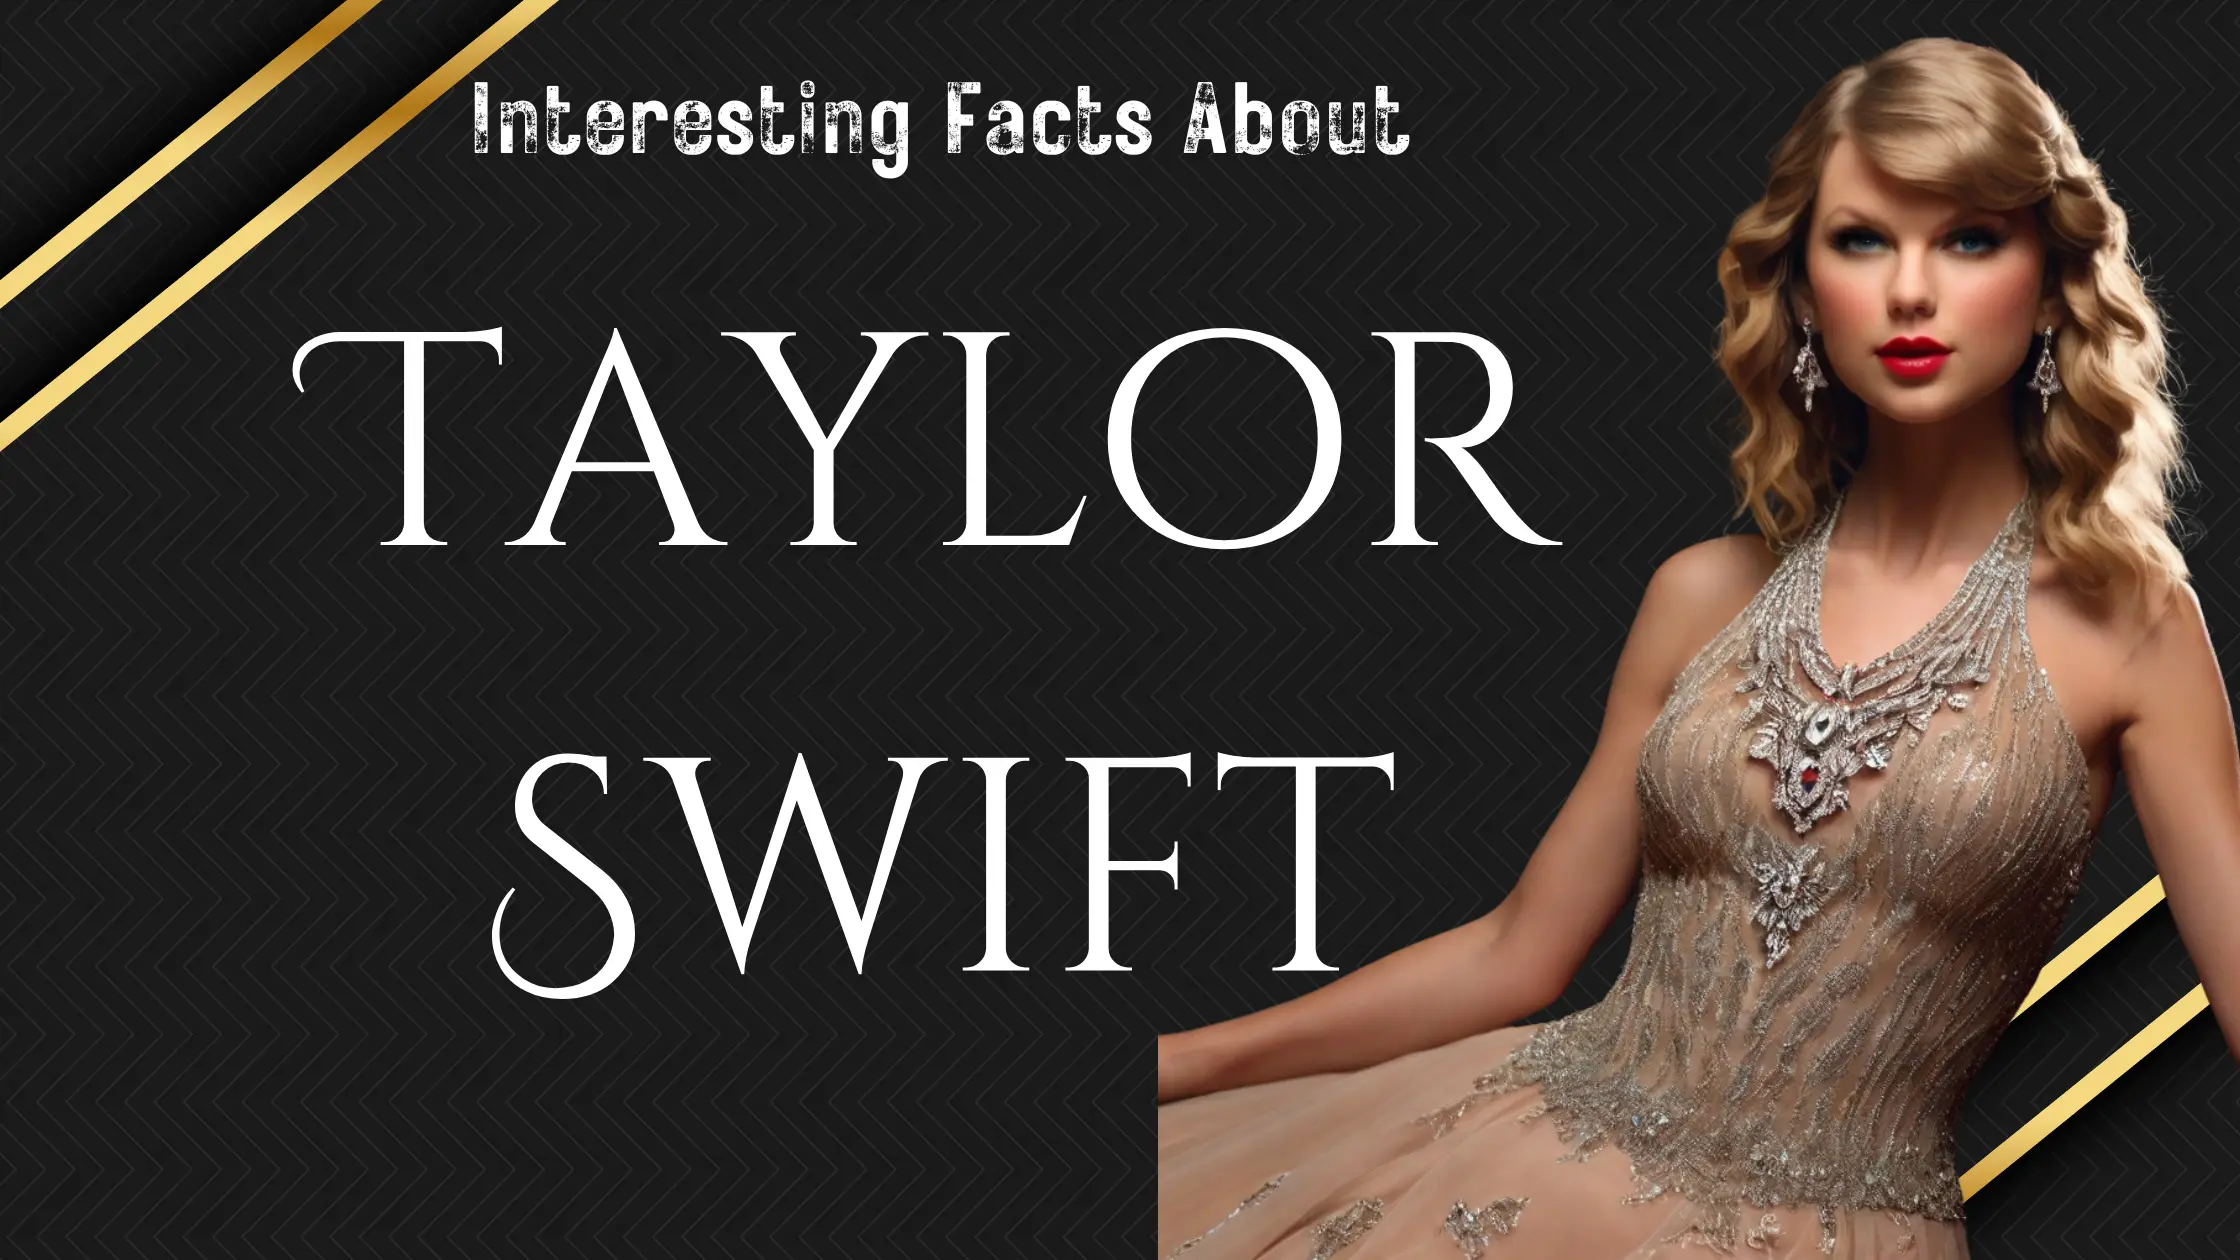 Facts About Taylor Swift